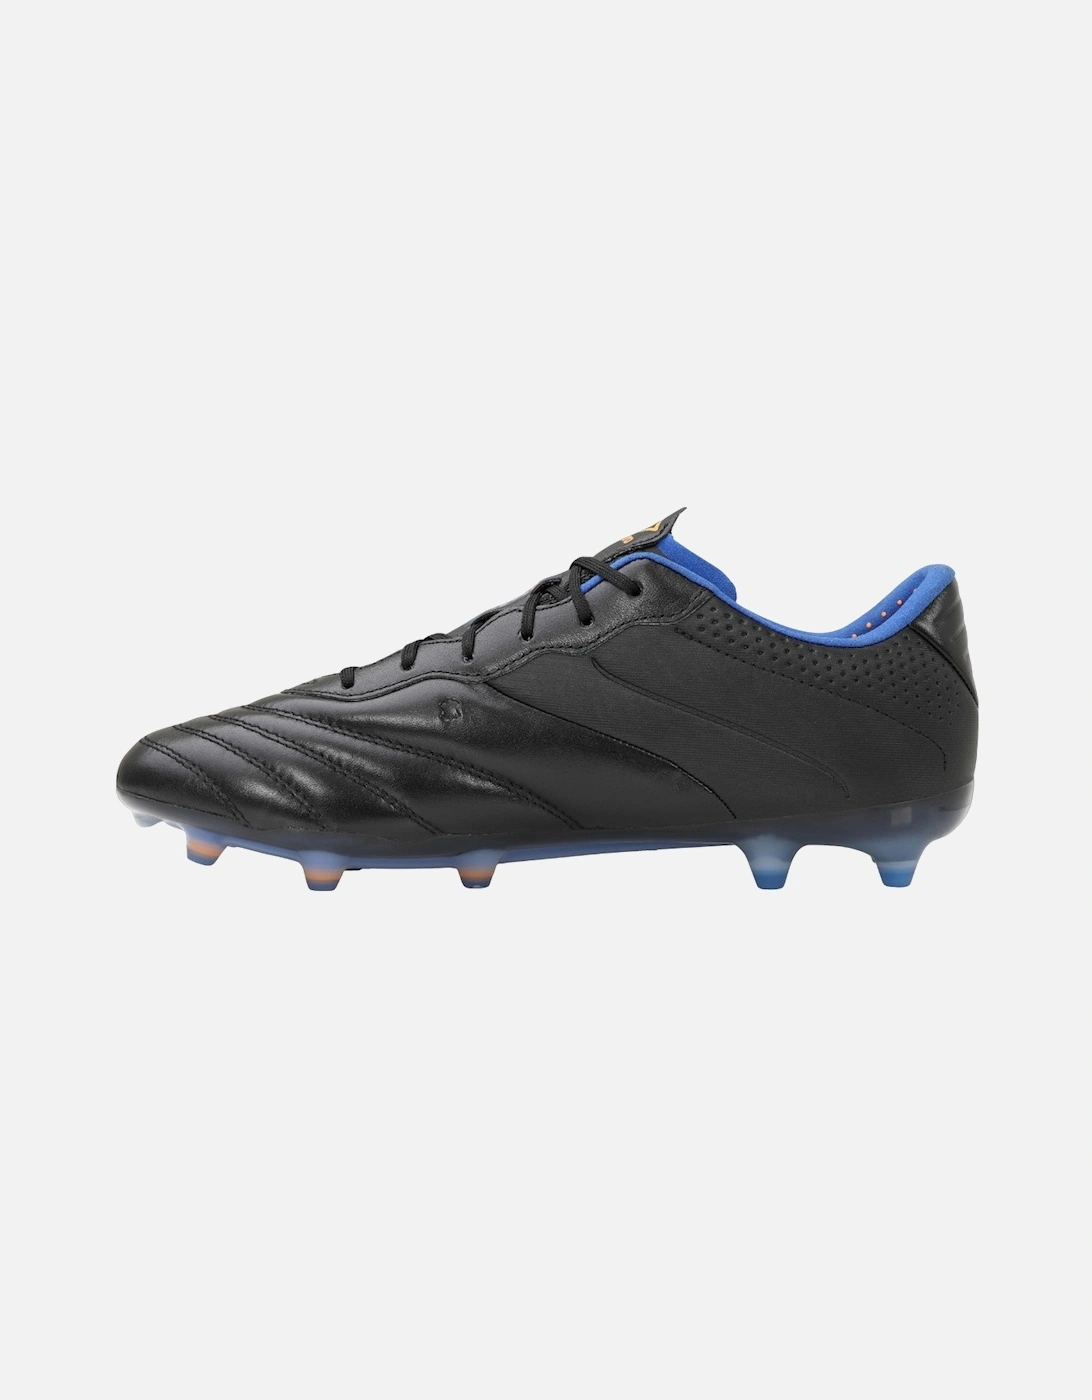 Mens Tocco III Pro Fg Leather Football Boots